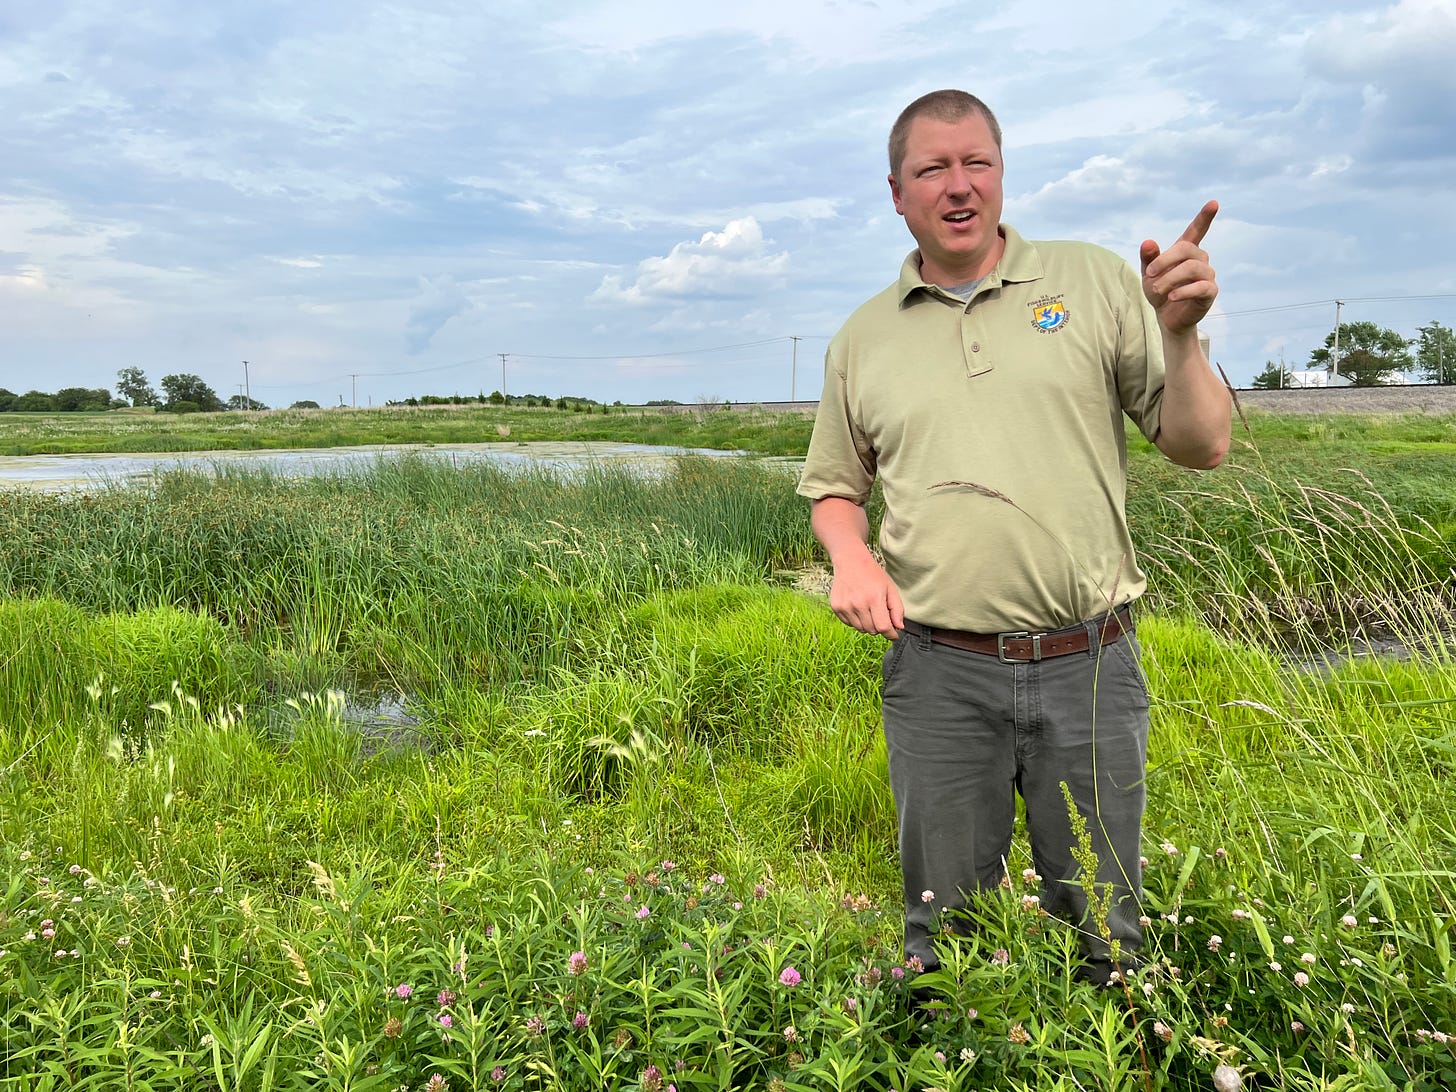 In this photo, Jason Bleich gestures as he explains how to restore a wetland. He is standing on the edge of a wetland in the midst of tall wetland plants that include grasses and flowers. The sky is blue and cloudy.